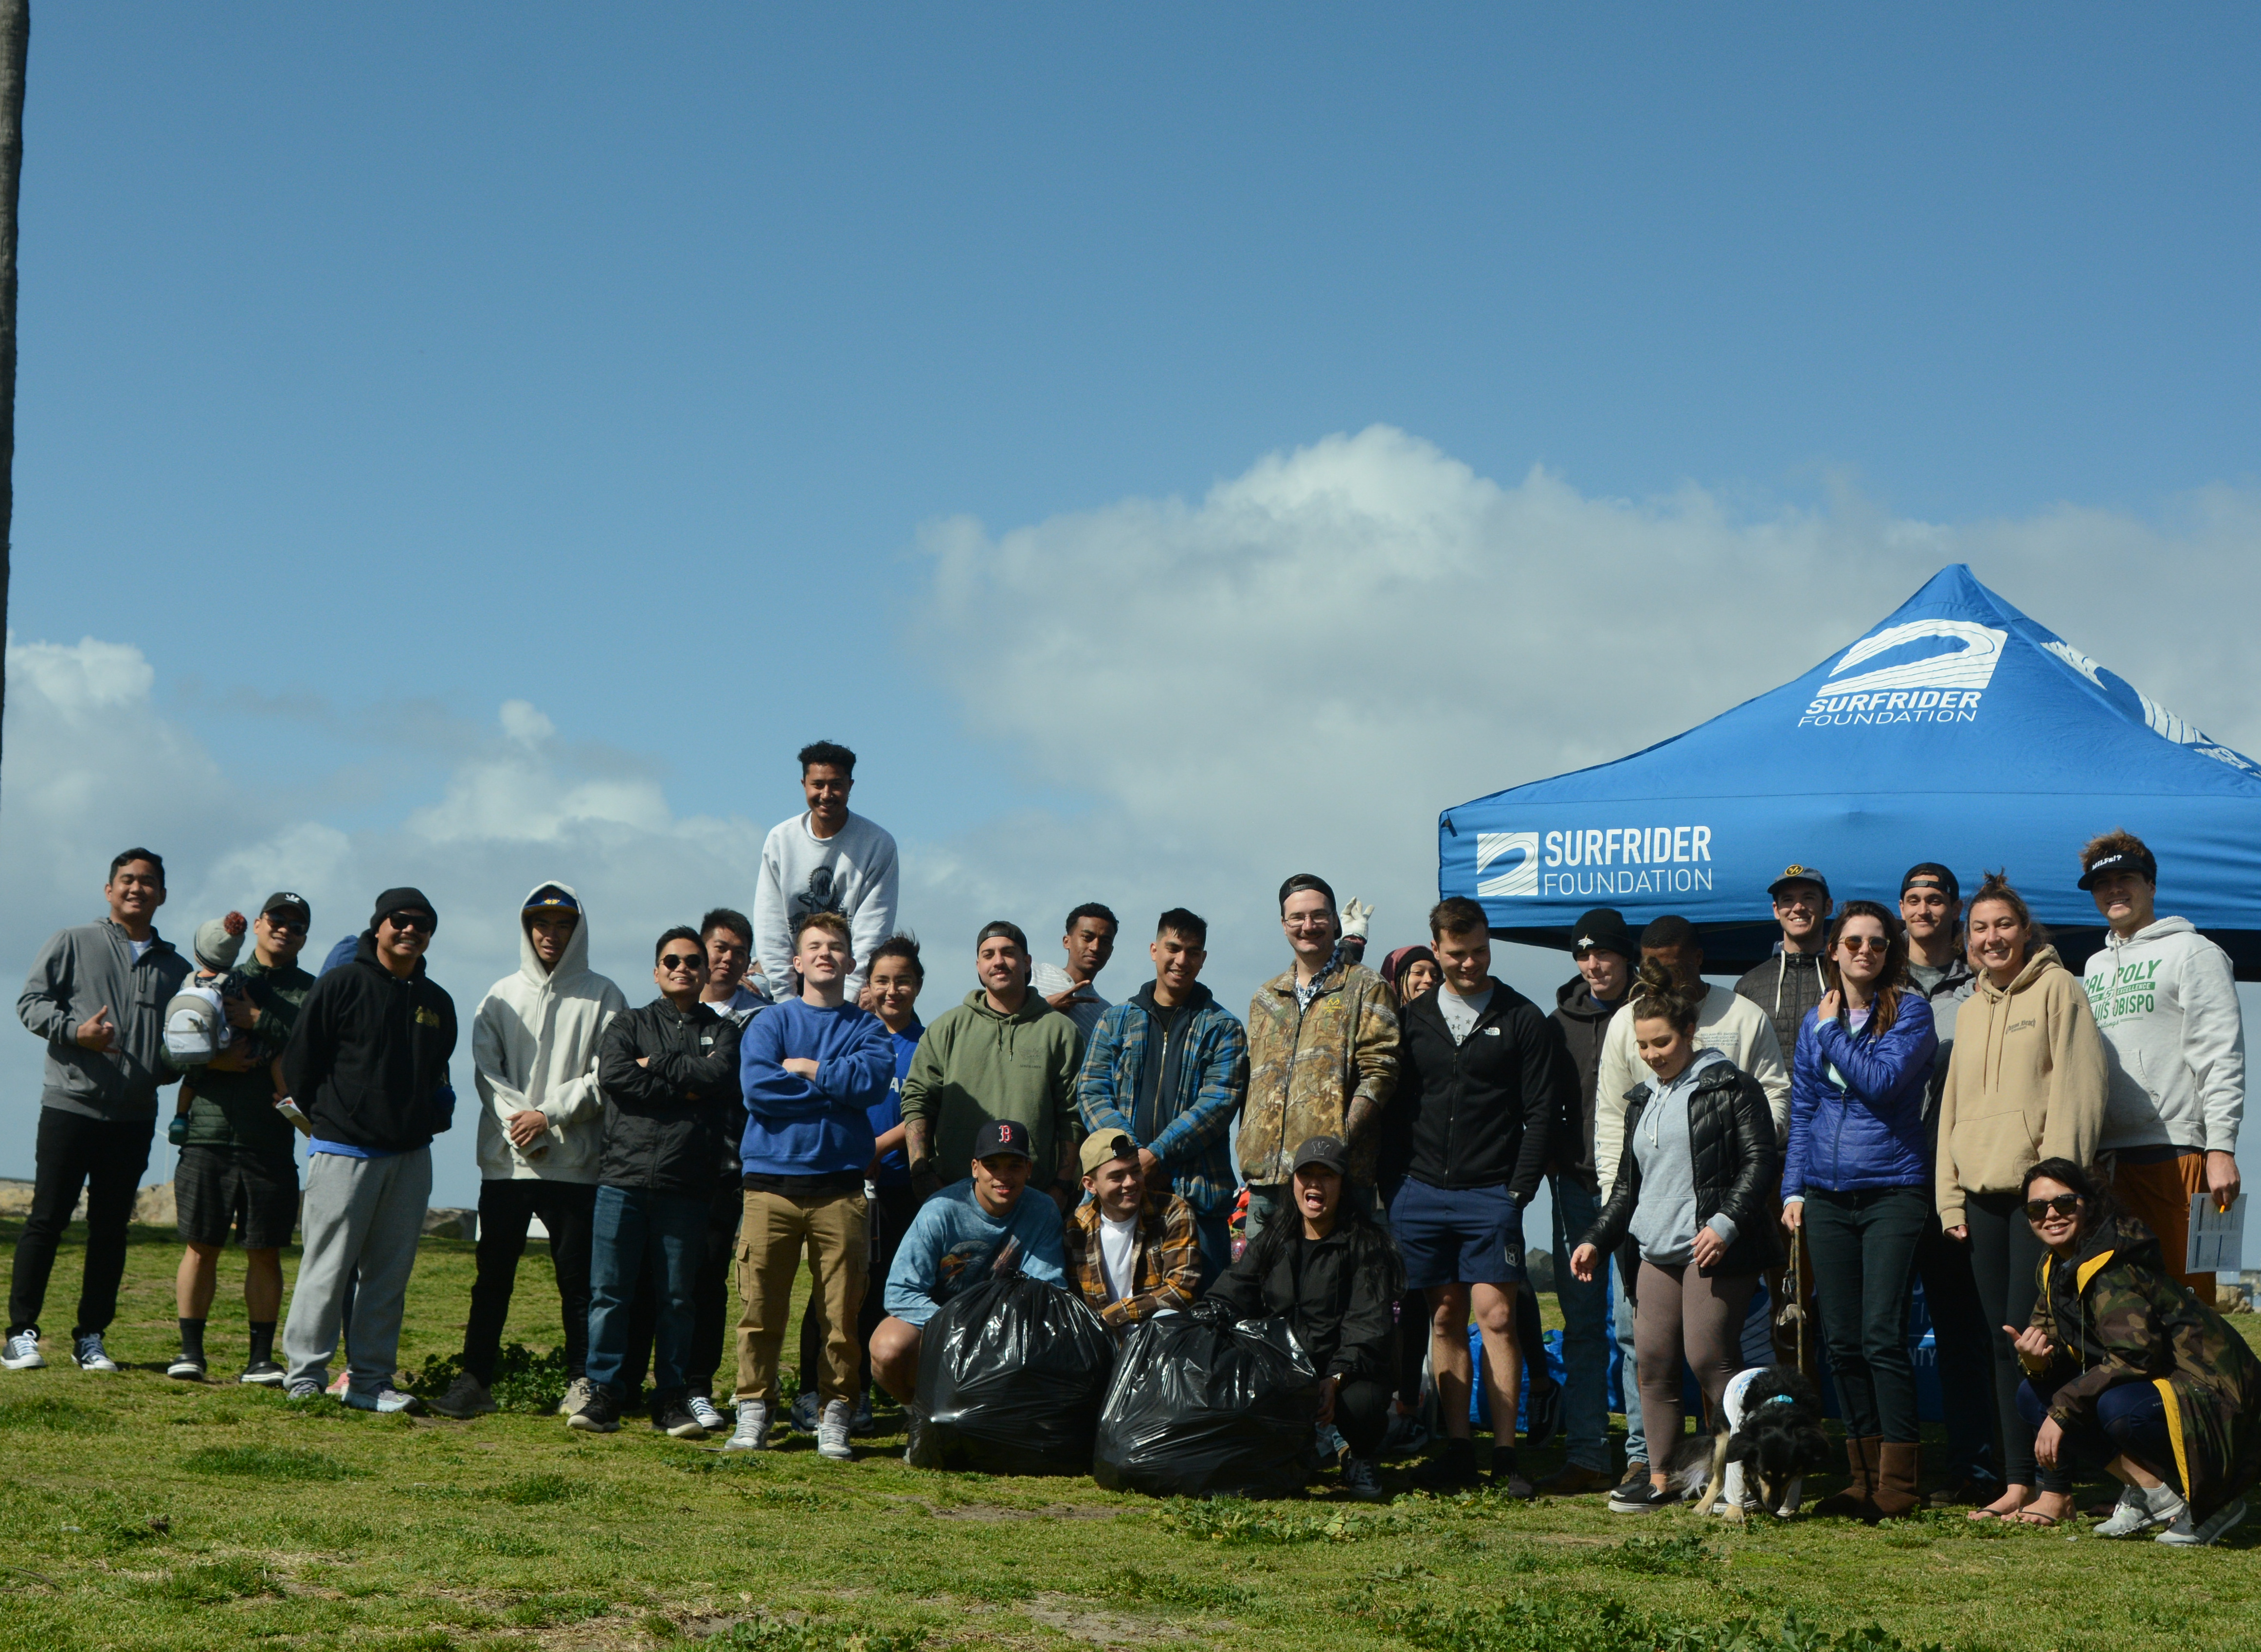 A large group of people standing on grass in front of a beach, posing with three large bags of trash that were collected off the beach.